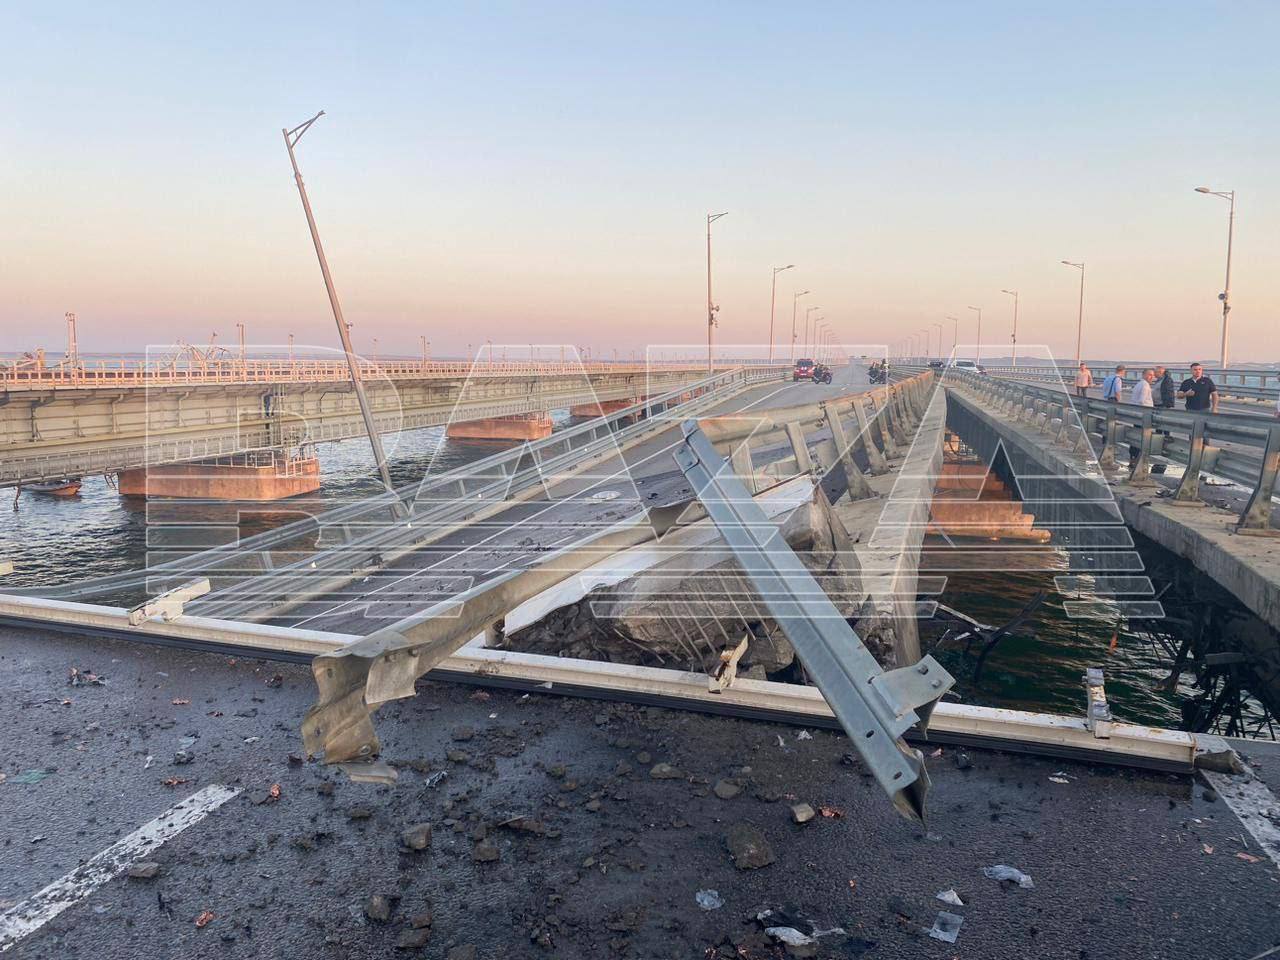 One of the spans collapsed, traffic stopped: photos and video of the aftermath of the explosions on the Crimean bridge have appeared